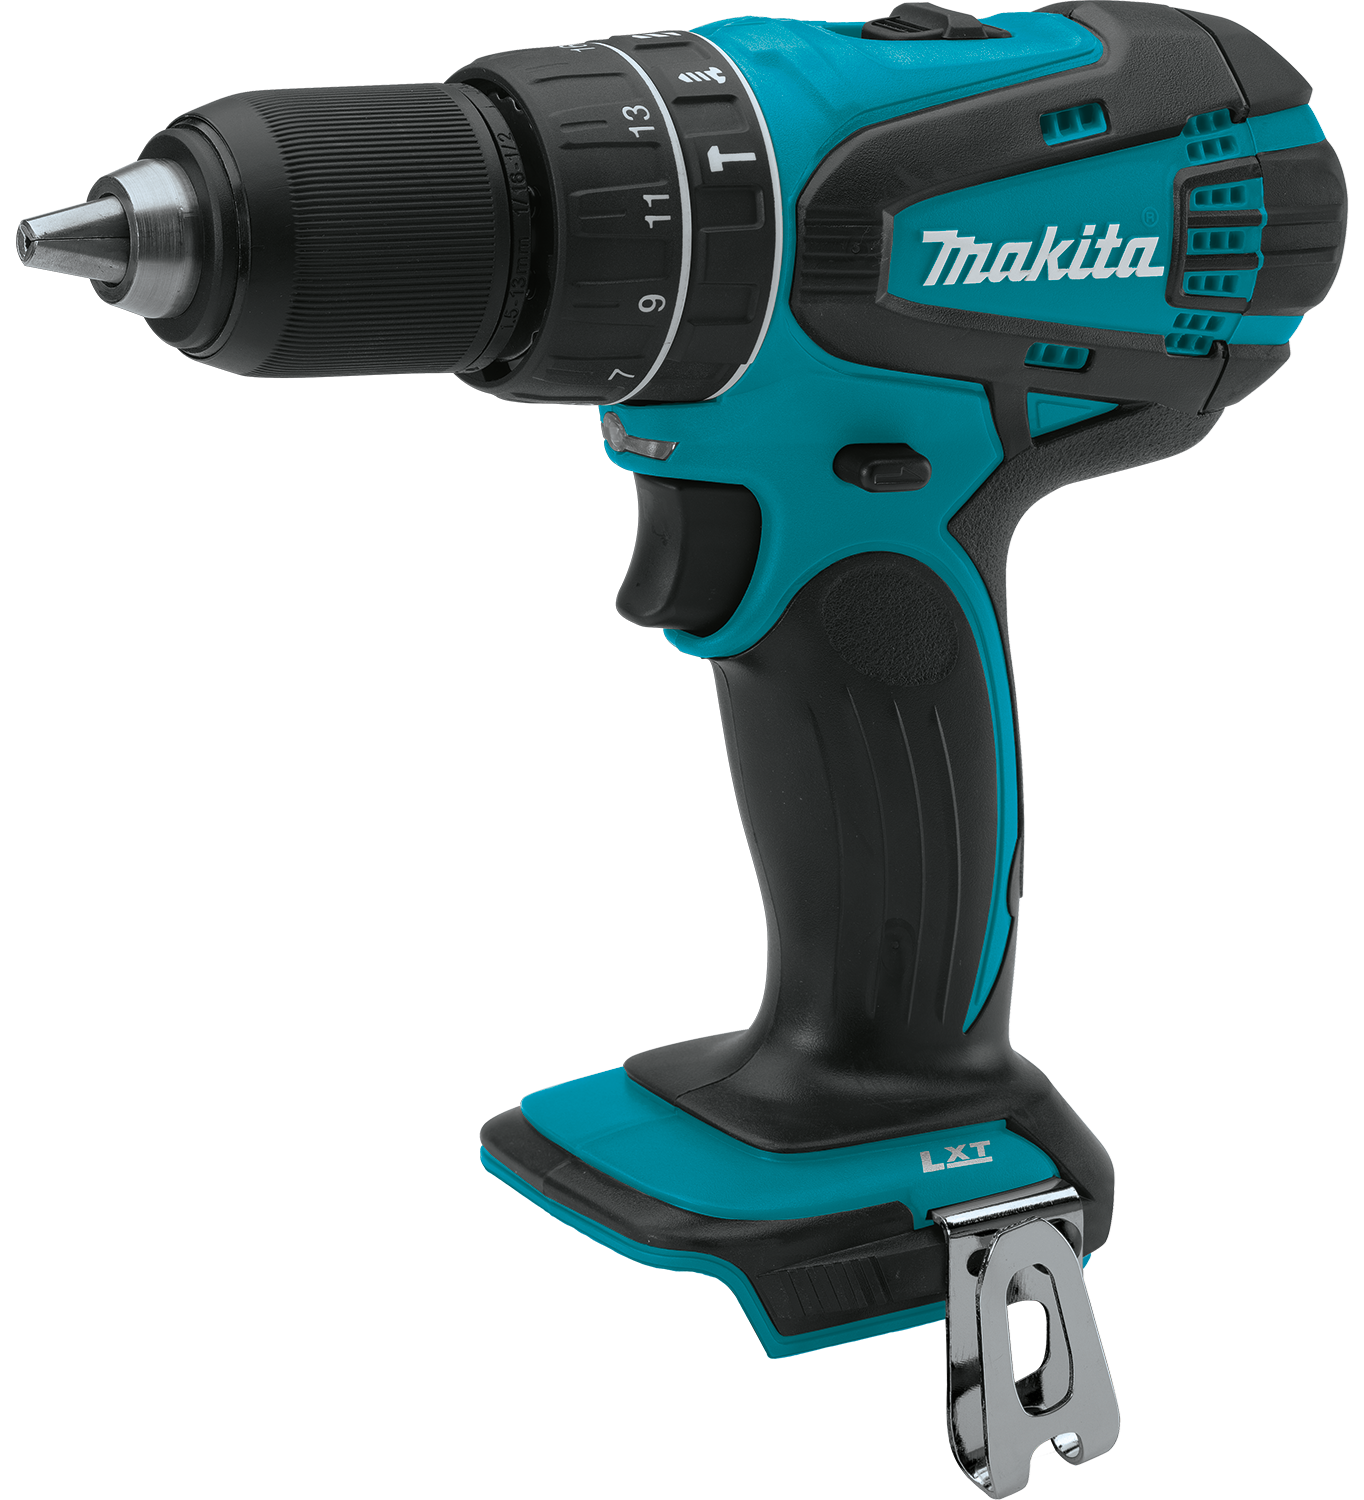 Makita 18 Volt Cordless 1/2 Inch Hammer Drill Factory Serviced (tool Only)